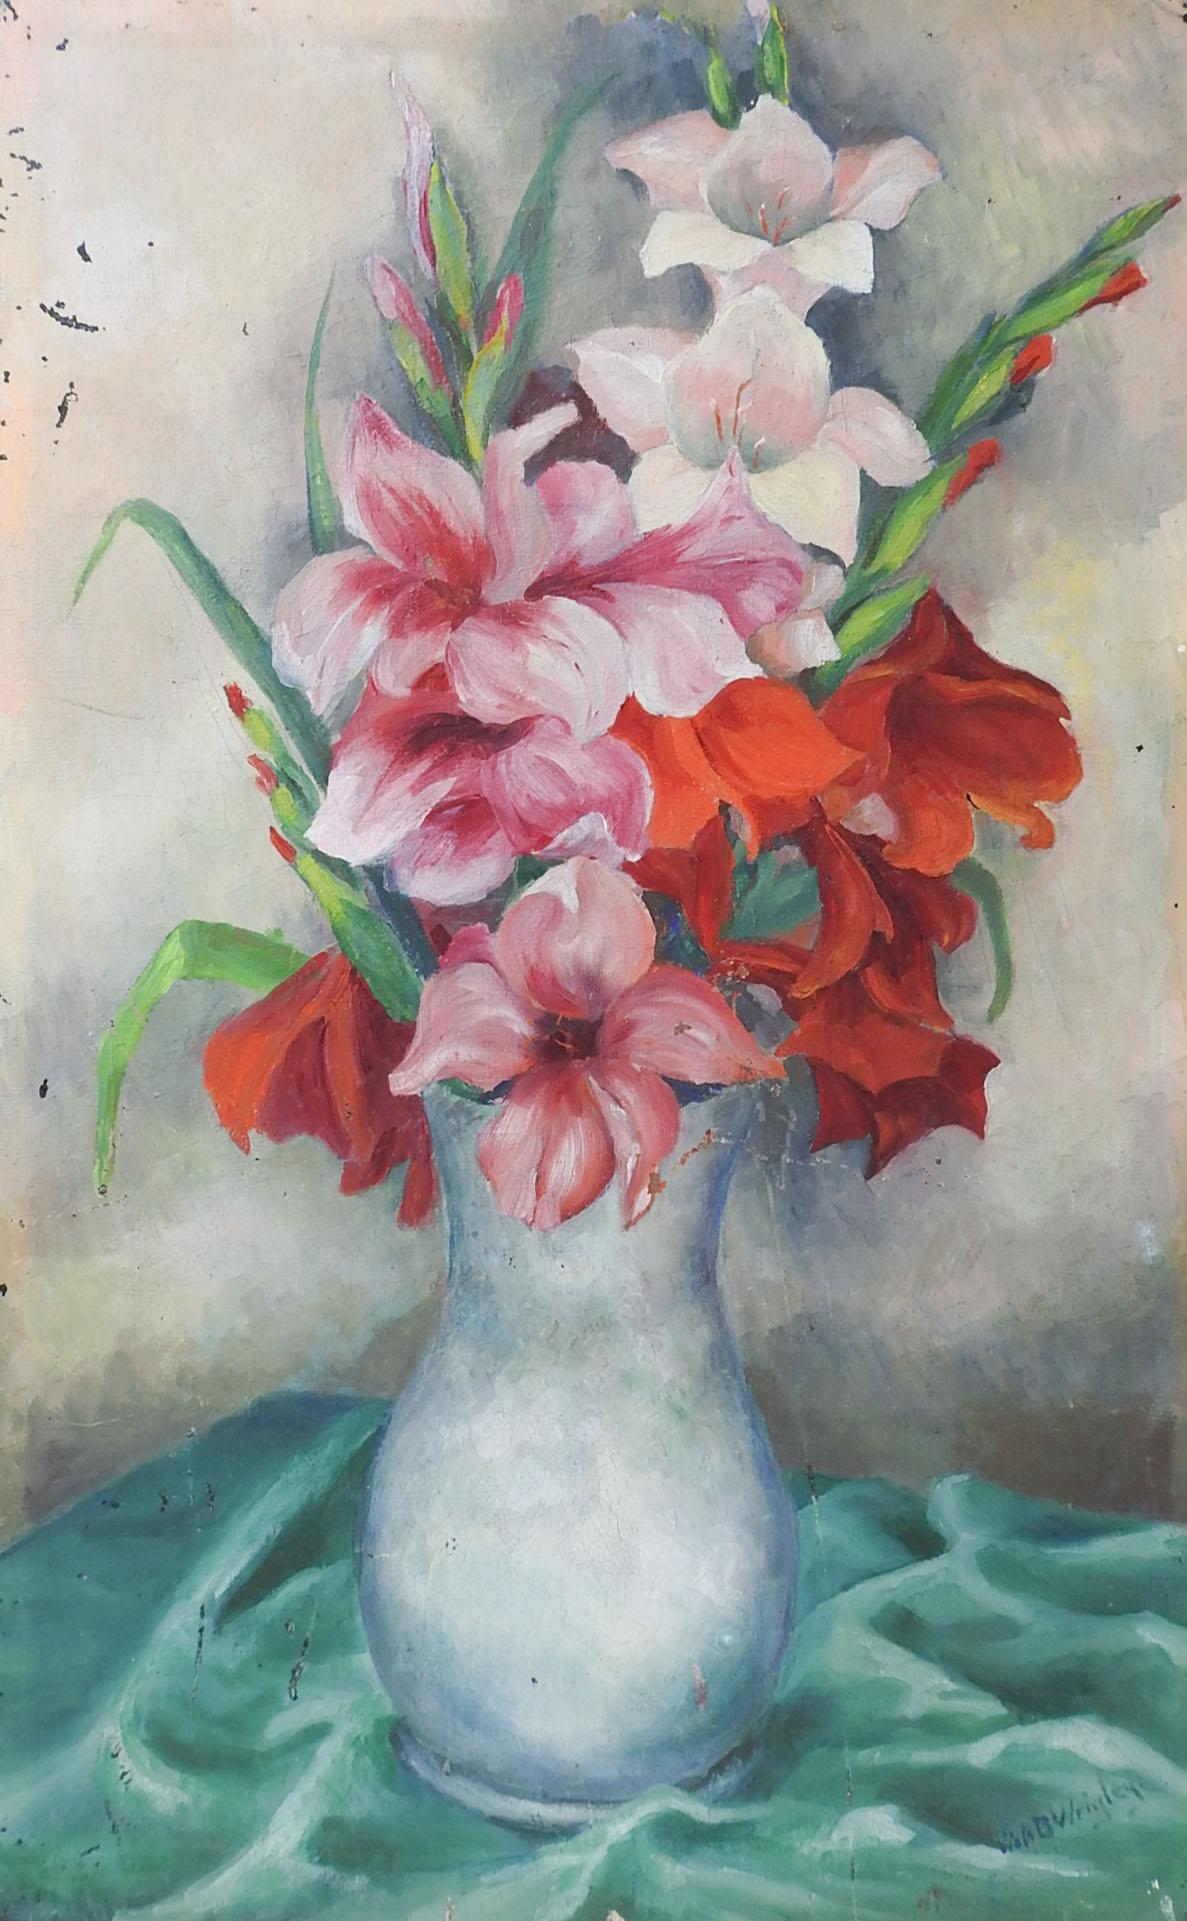 Vintage circa 1930's oil on canvas board still life with pink and red Gladiolas by Viola Blackman Wrigley (b. 1892) New York/Indiana. Signed lower right corner. Unframed, edge wear, scattered paint losses.